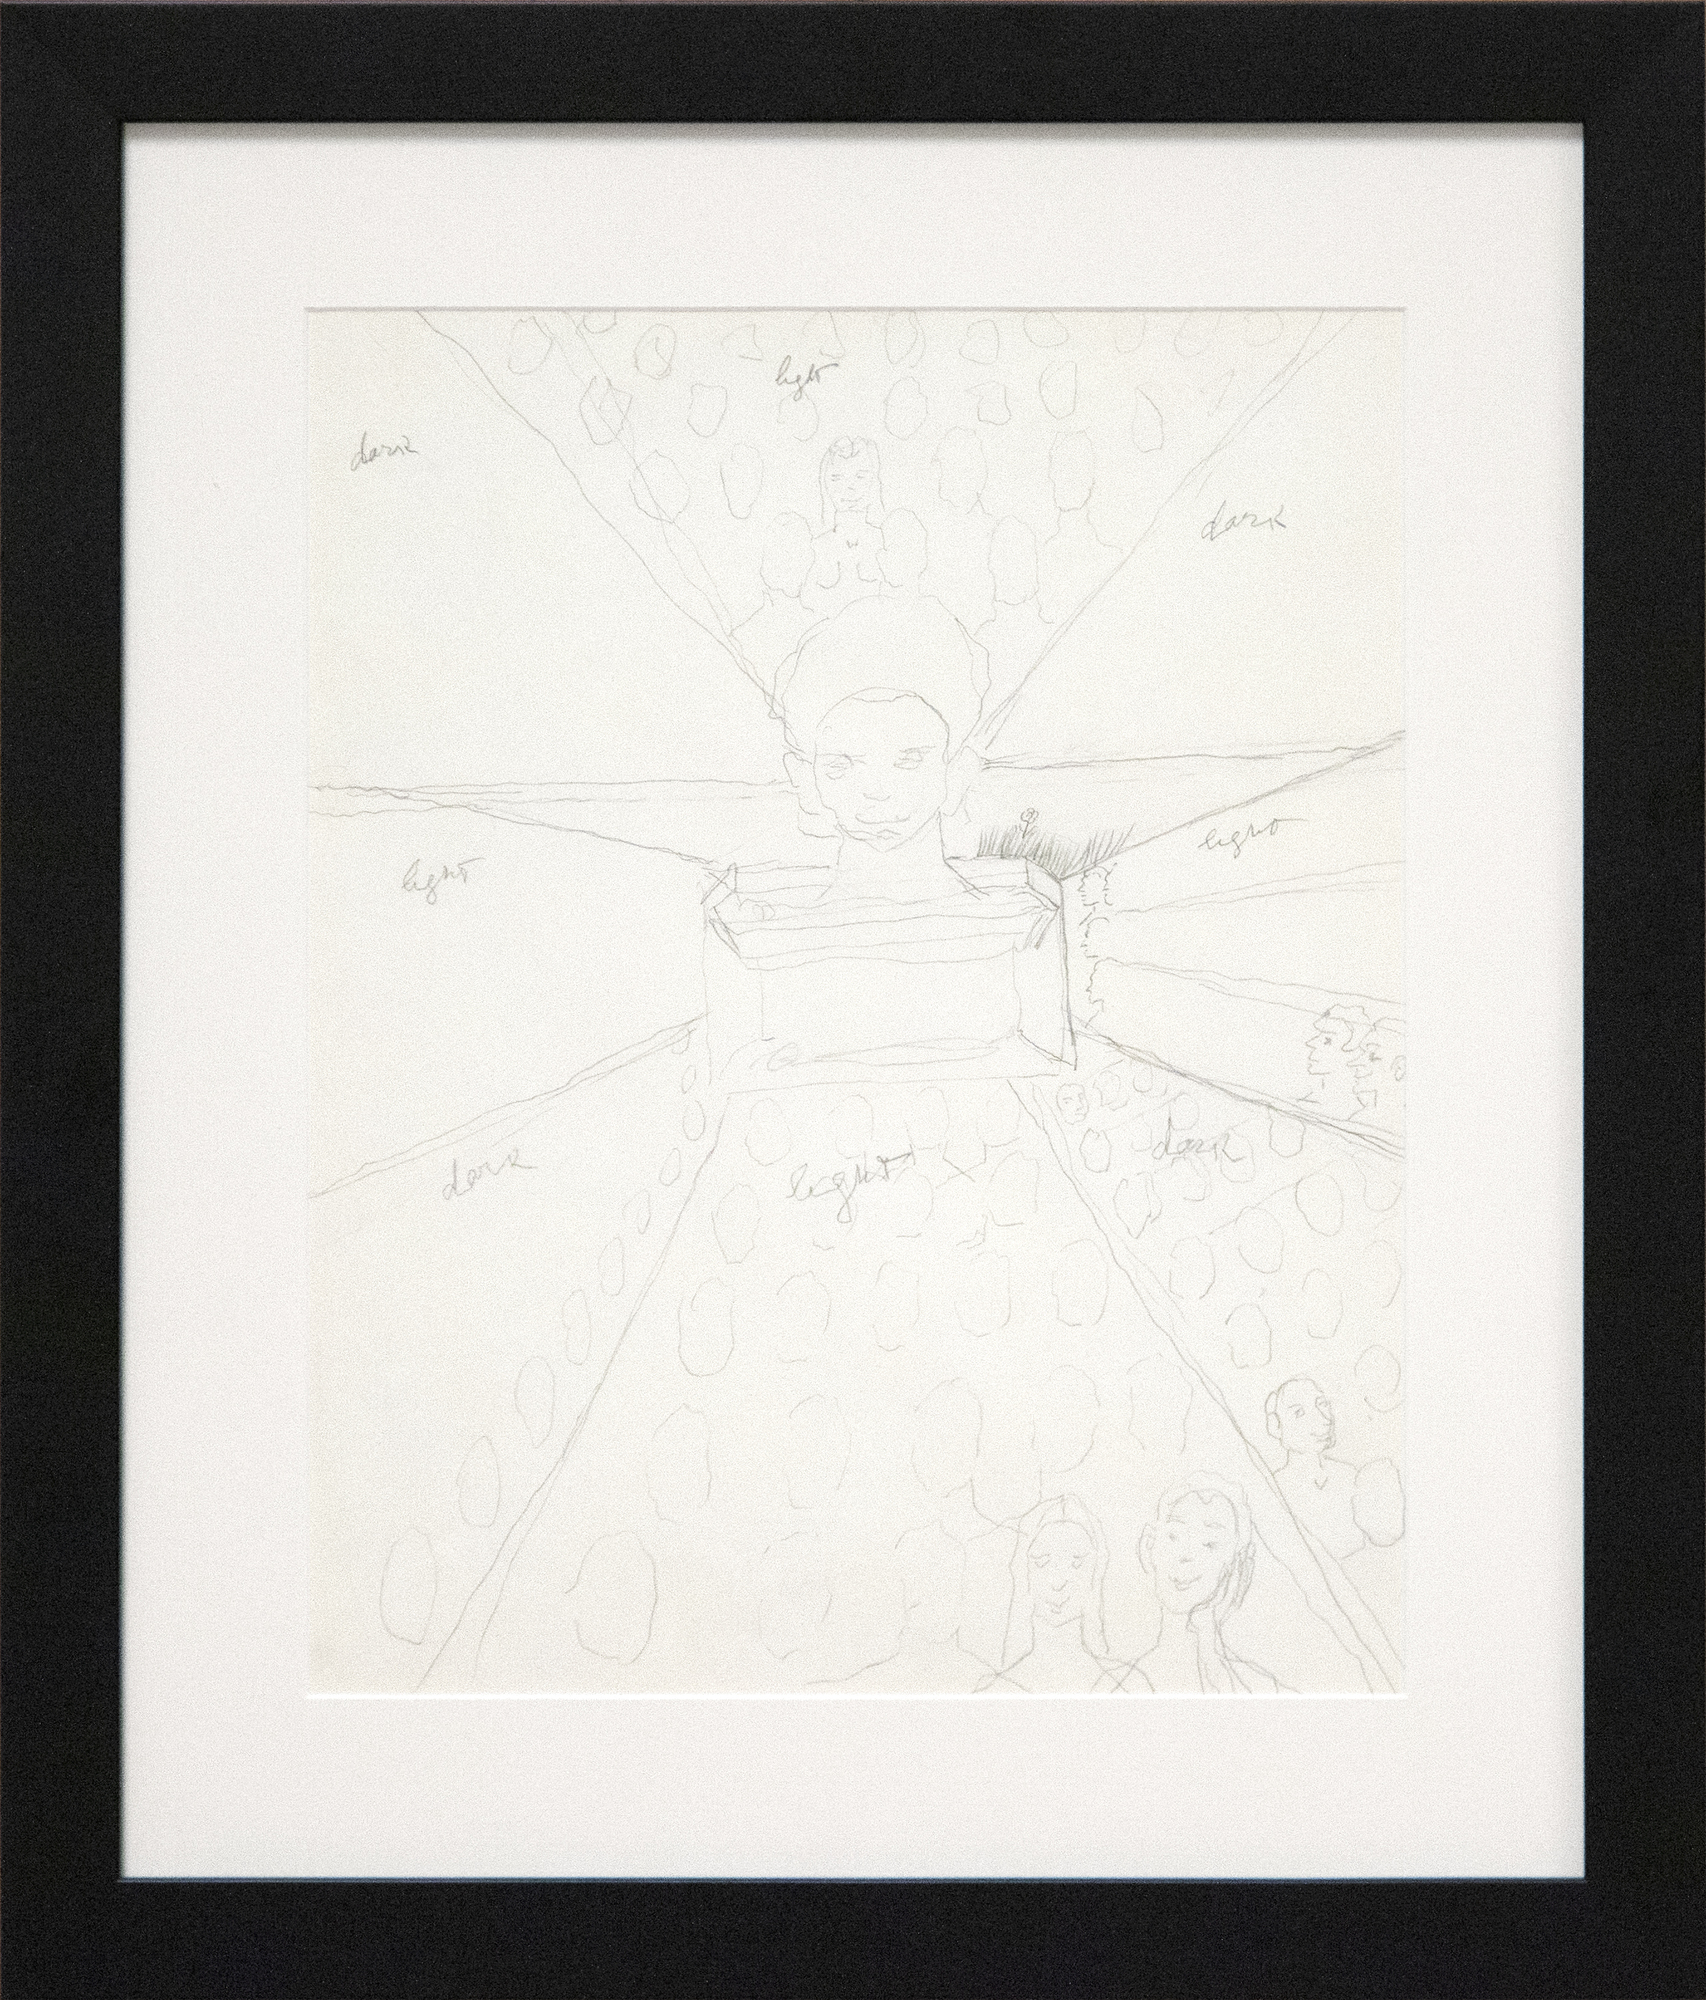 IRVING NORMAN - Untitled (Possible Study for "The Immortality of Beethoven's 9th Symphony" 2) - graphite on paper - 14 x 11 in.